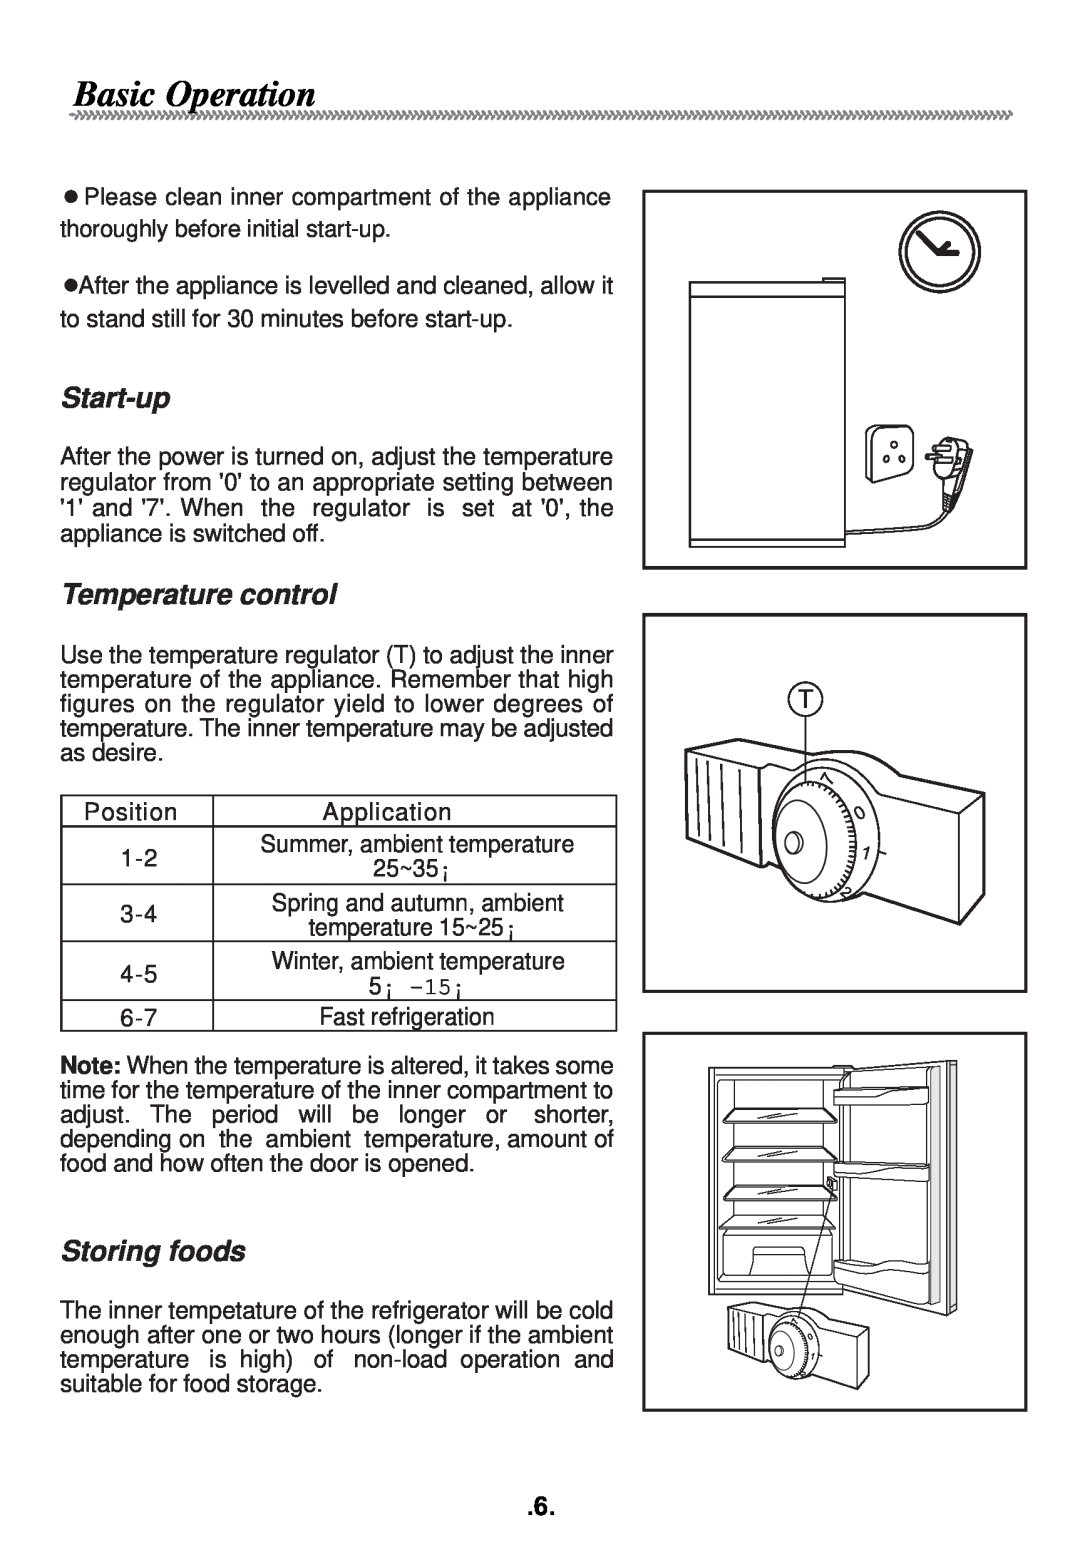 Haier HR-135AR/A manual Basic Operation, Start-up, Temperature control, Storing foods 